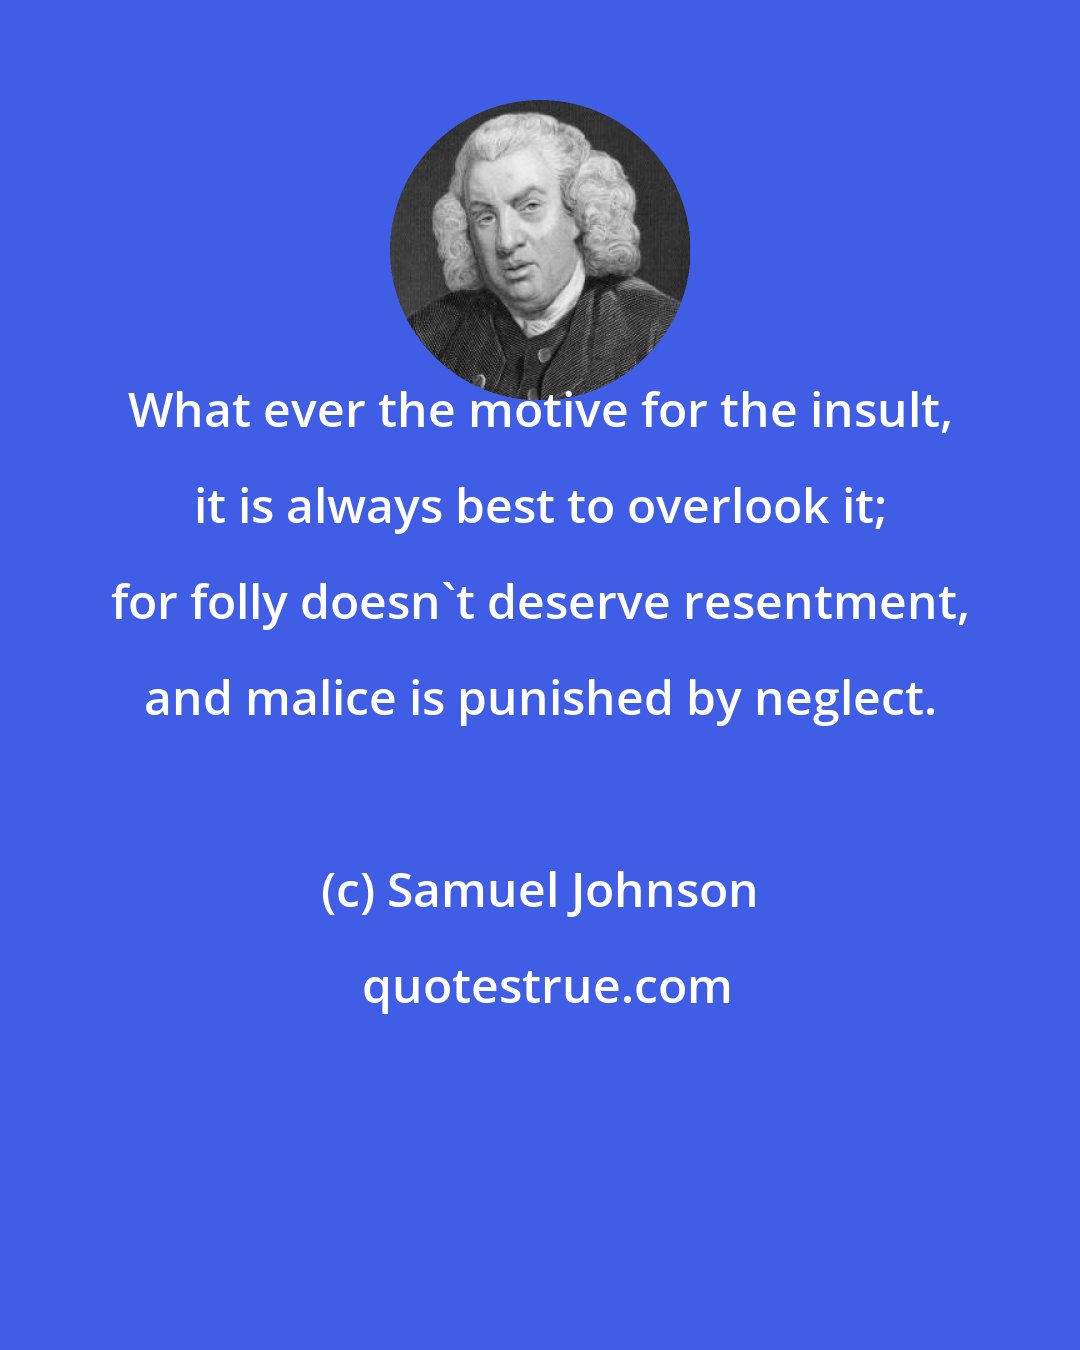 Samuel Johnson: What ever the motive for the insult, it is always best to overlook it; for folly doesn't deserve resentment, and malice is punished by neglect.